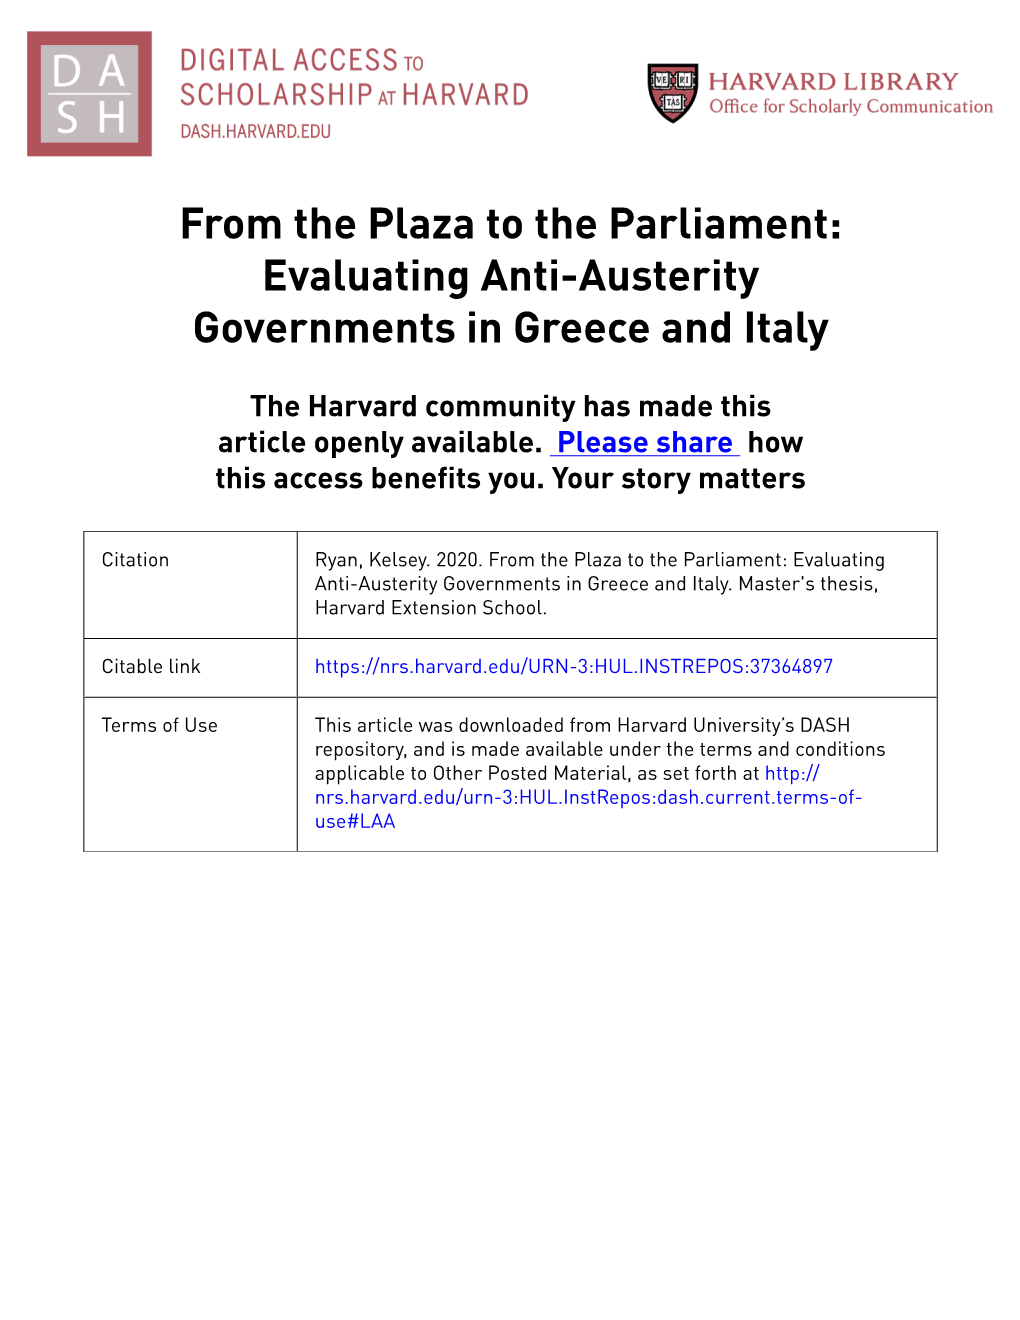 Evaluating Anti-Austerity Governments in Greece and Italy